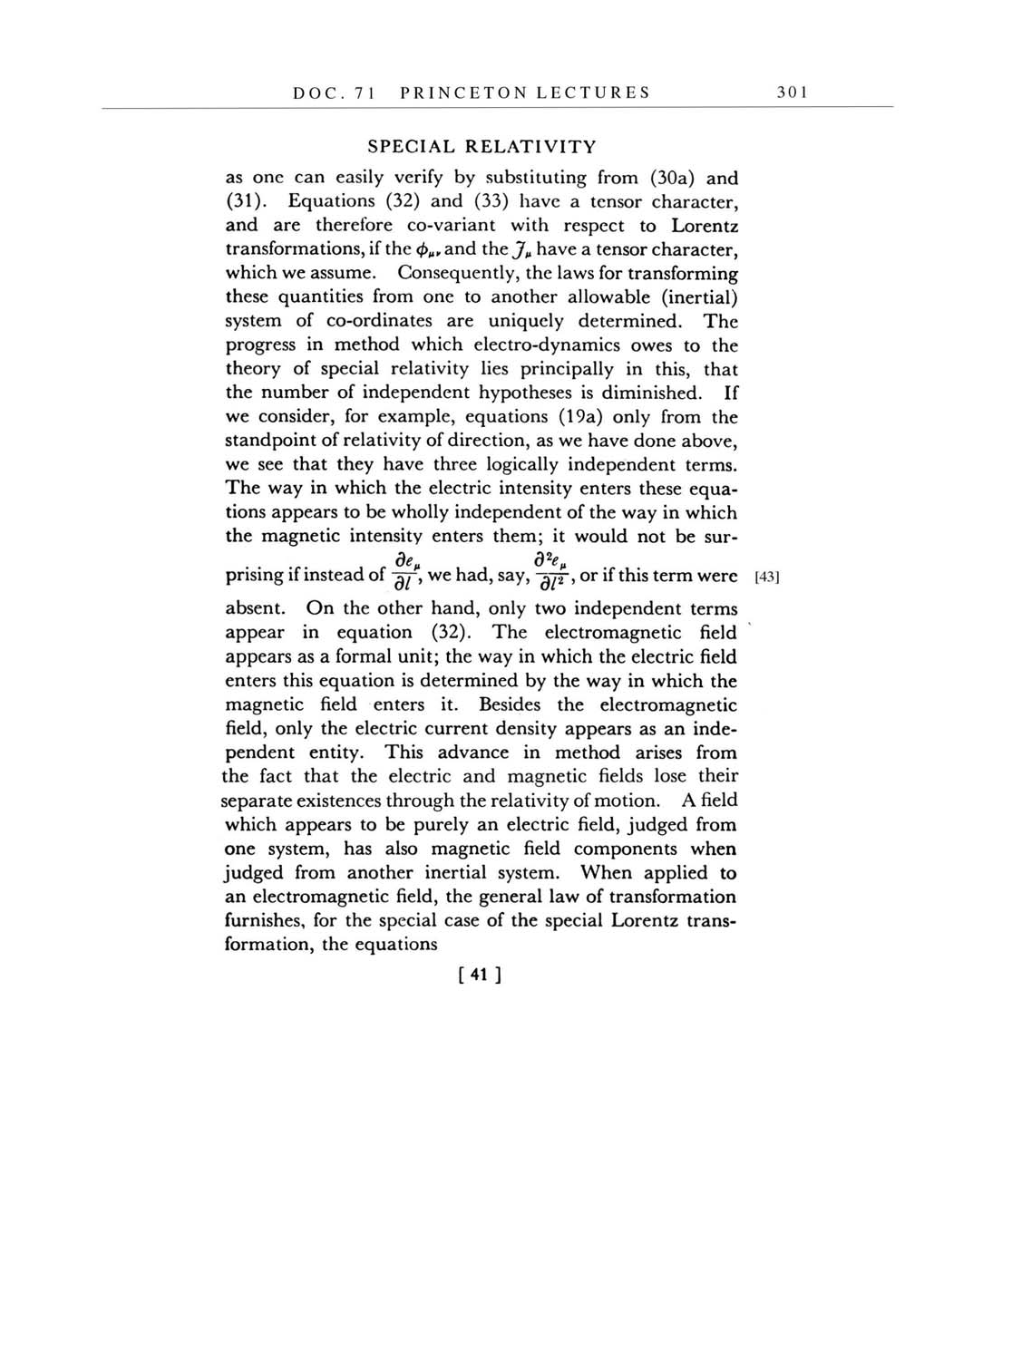 Volume 7: The Berlin Years: Writings, 1918-1921 (English translation supplement) page 301